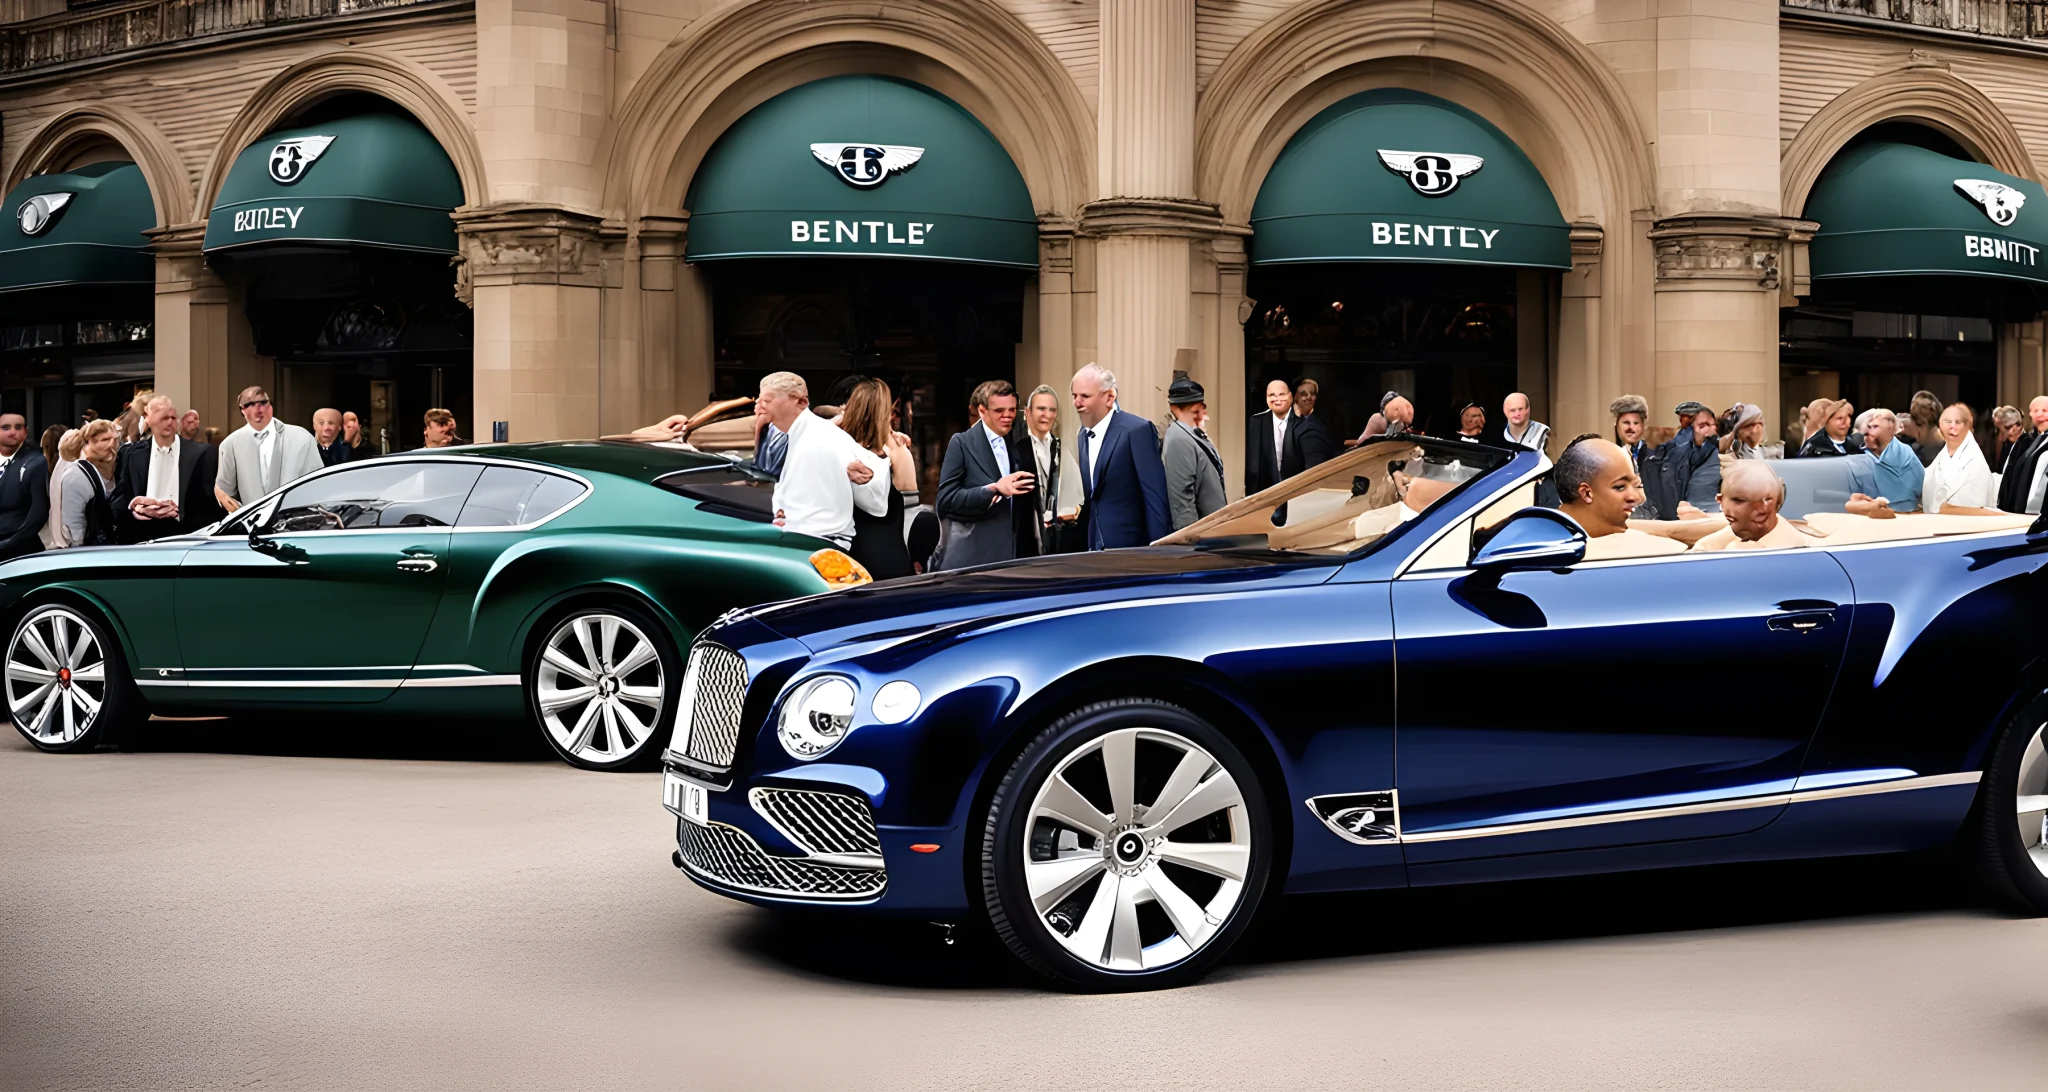 The image features a gathering of luxury cars and their owners at a Bentley enthusiast event. The sleek, polished vehicles are the focal point of the photograph, surrounded by a group of people chatting and admiring the cars.